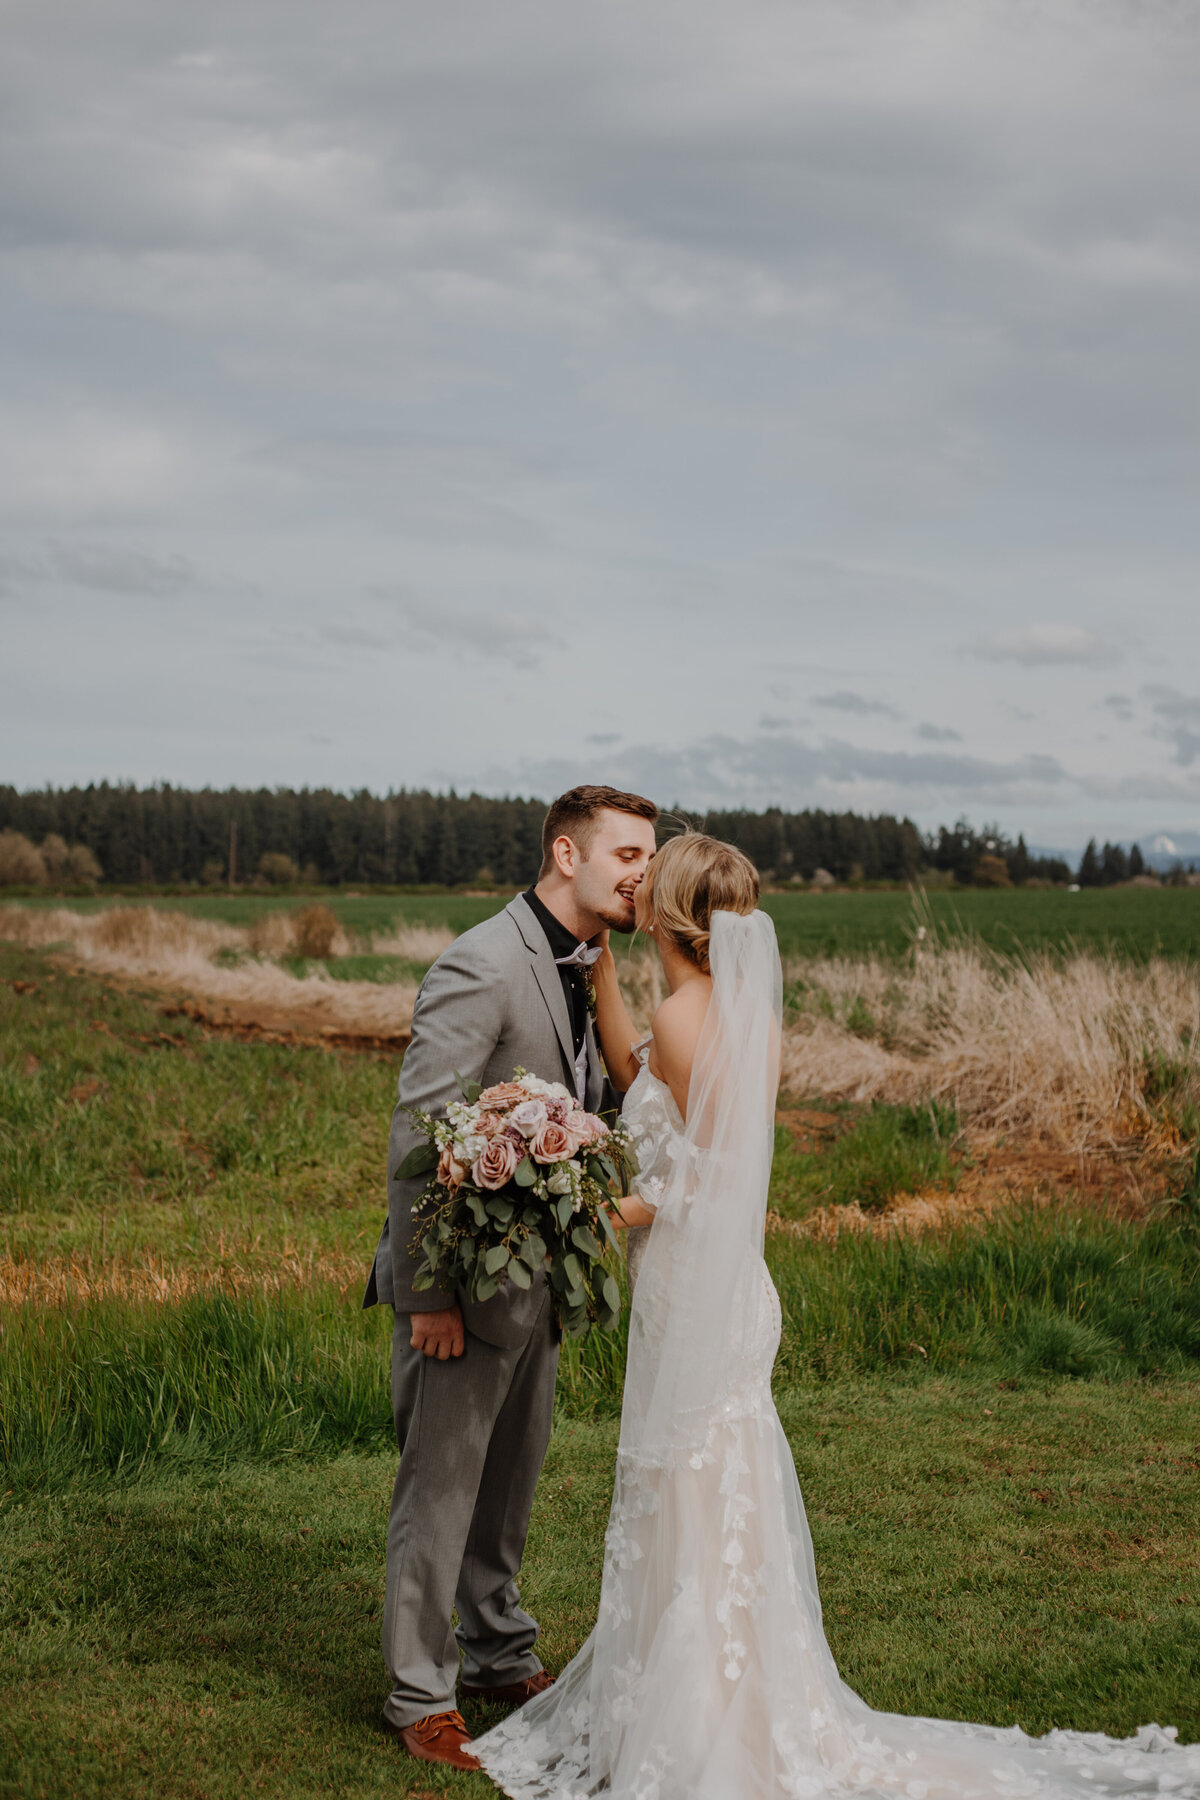 Bride and groom kissing in a grassy field